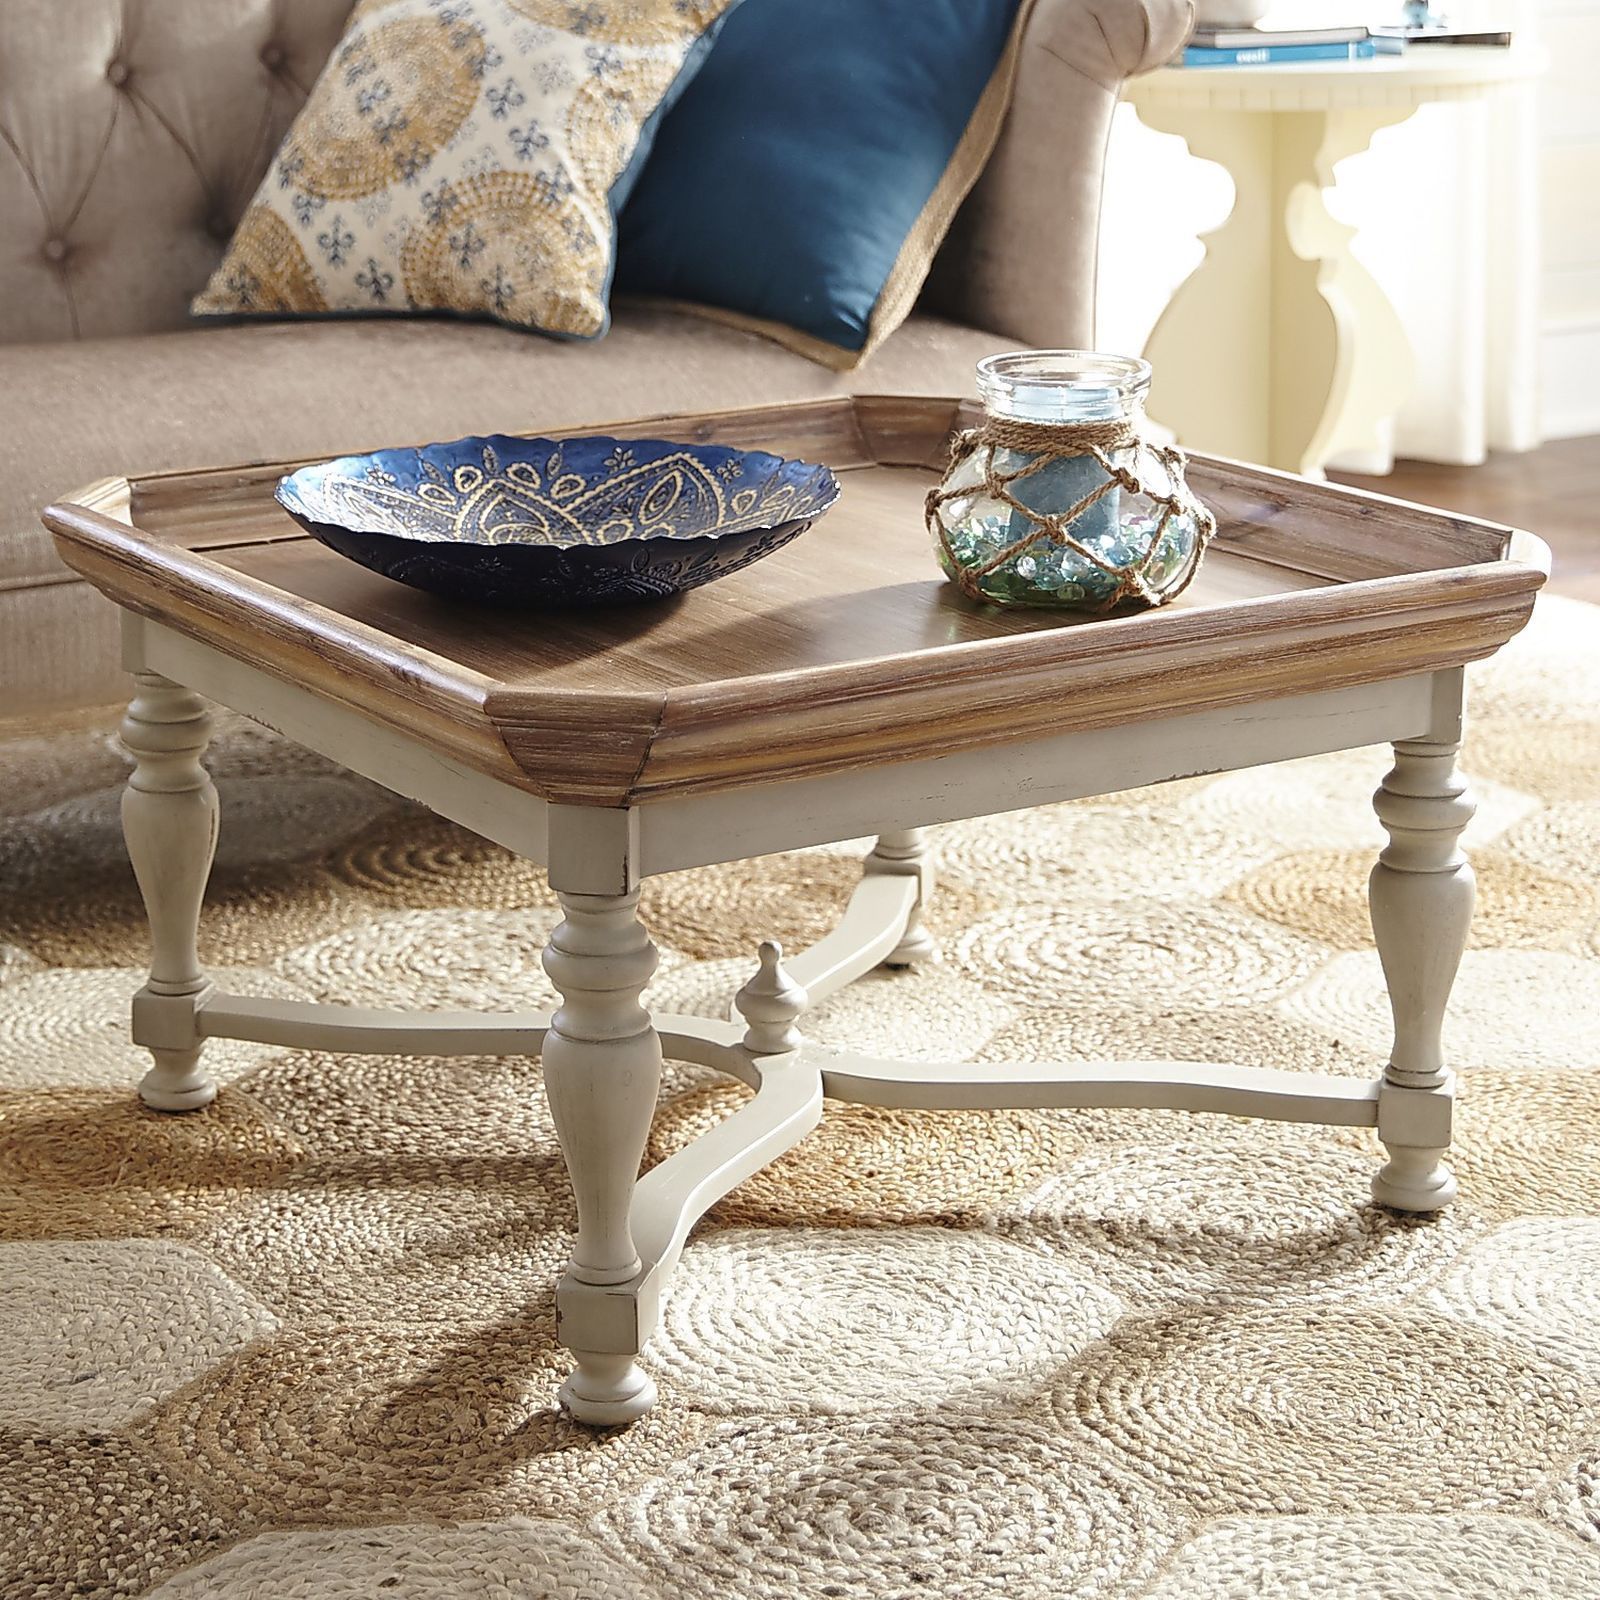 Amelia Natural Stonewash Square Coffee Table | Coffee Table Square Throughout Transitional Square Coffee Tables (View 19 of 20)